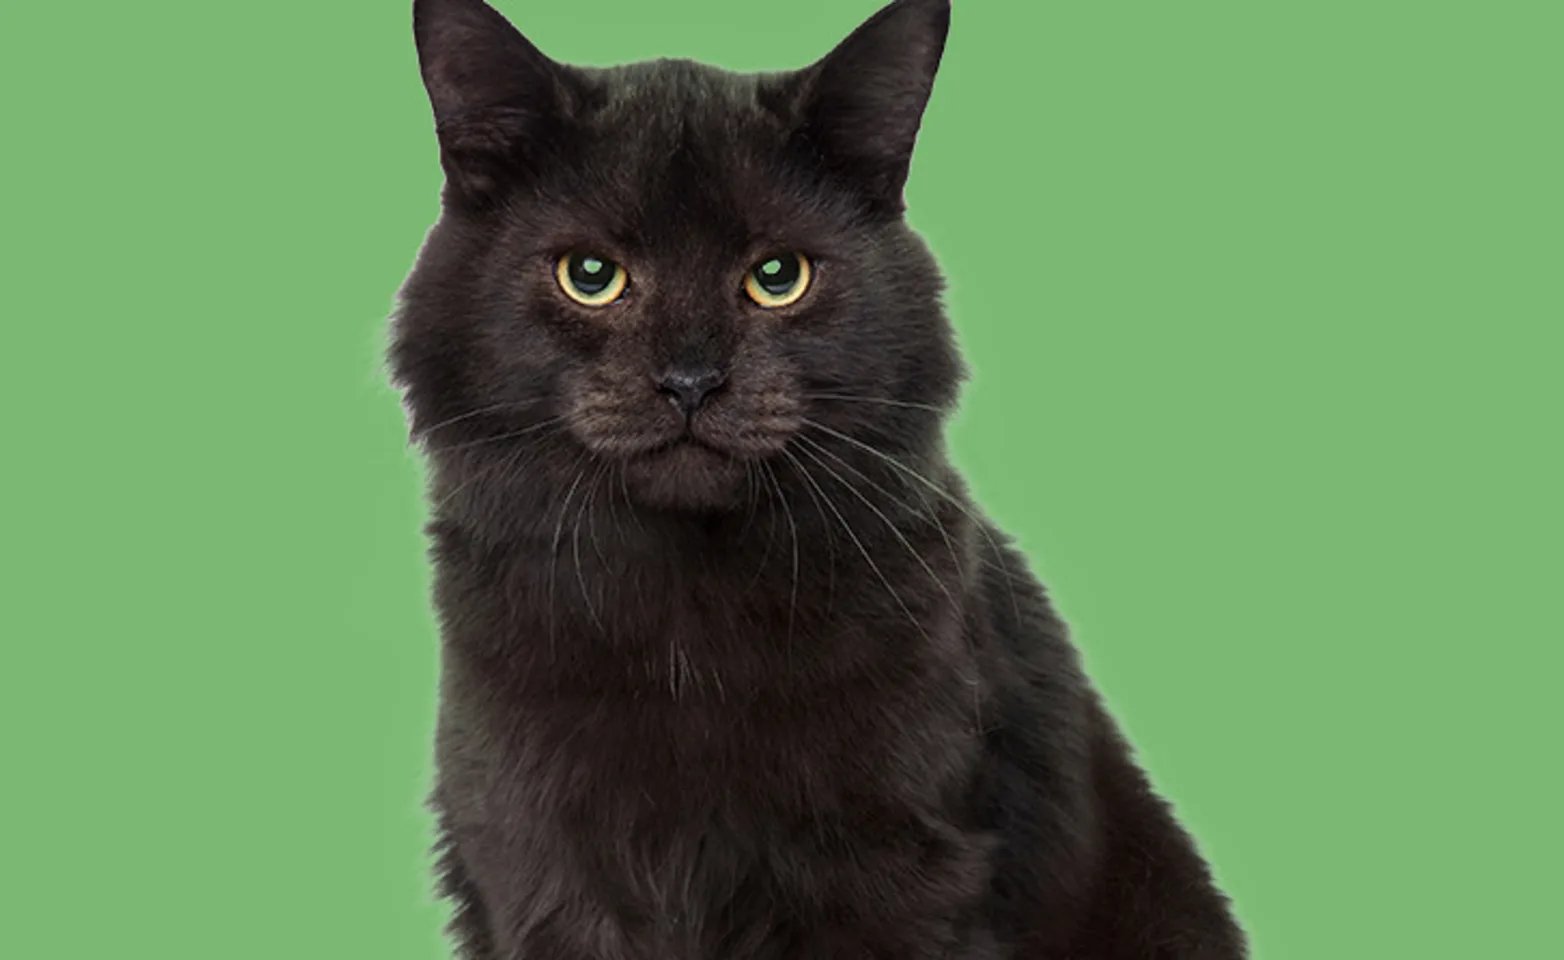 cat sitting on a green background